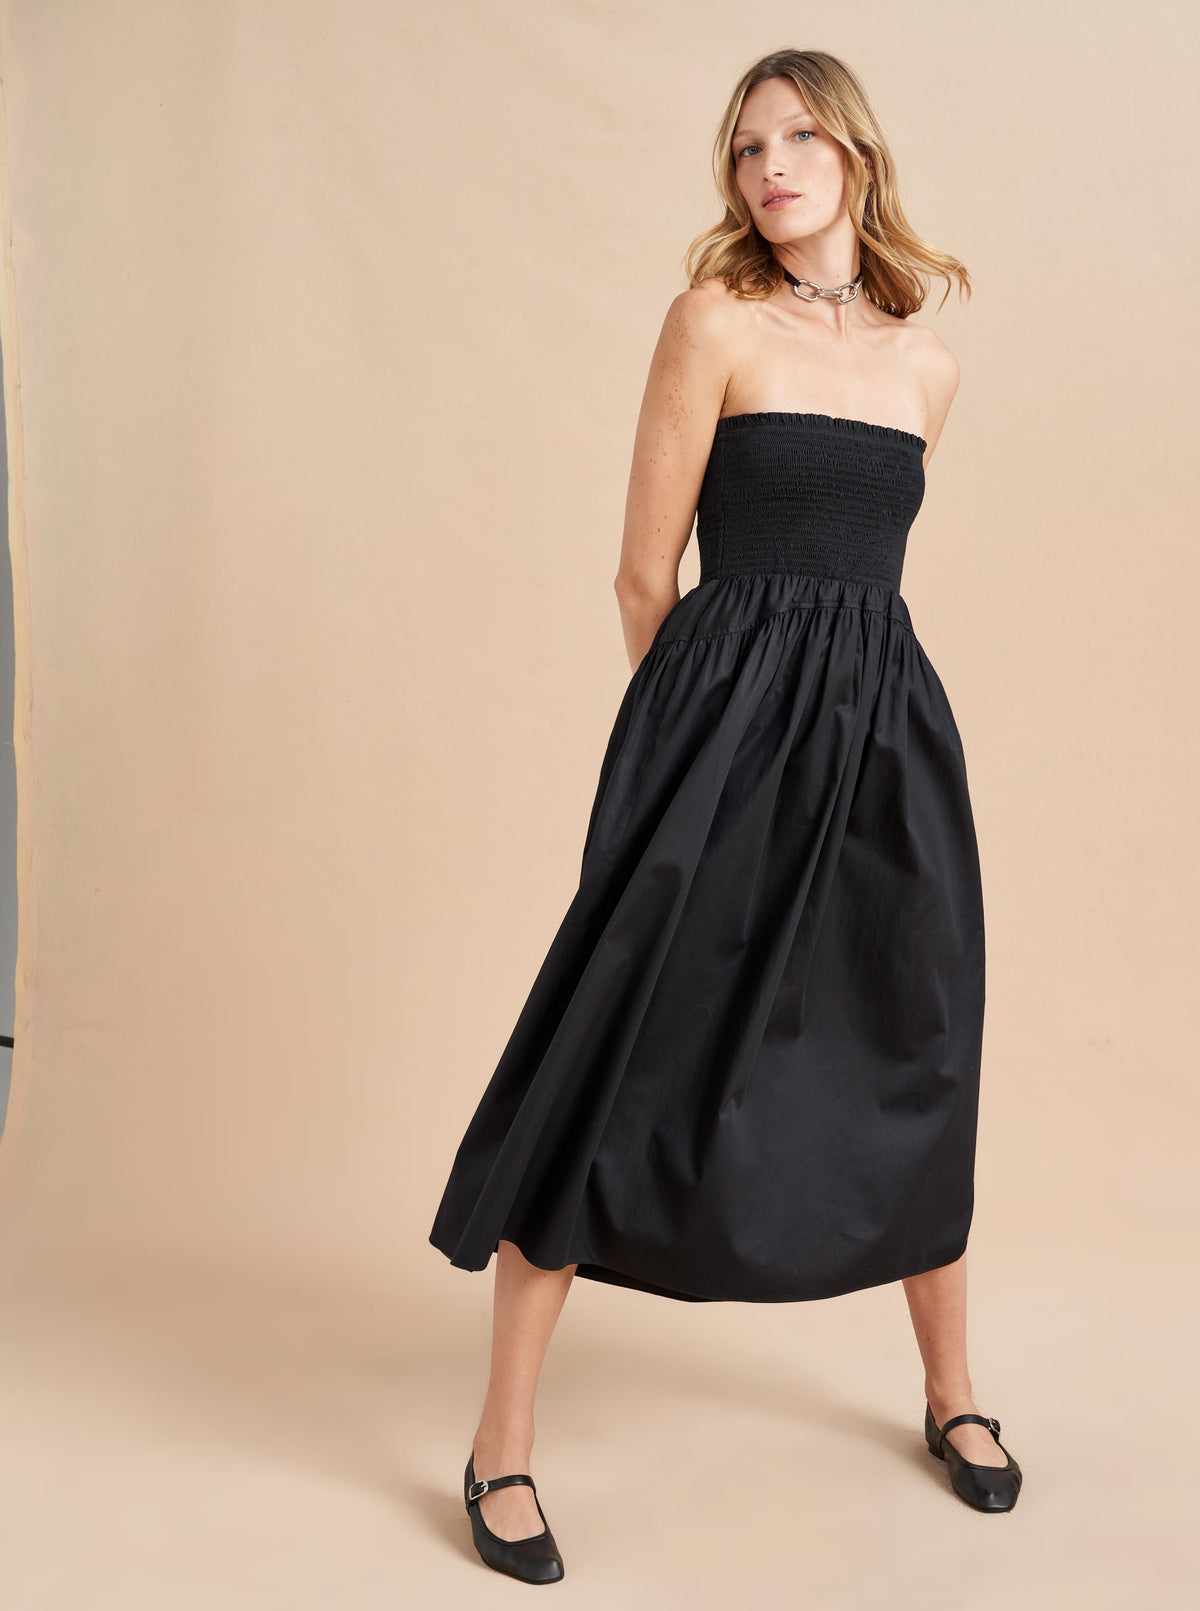 Chances are you already one of our can't-keep-them-in-stock Vivian Dresses. She is now available as a strapless option with all the same details like the smocked bodice that we have perfected and a round skirt with pockets that you know and love us for. Go ahead and run away together, you'll never look back.